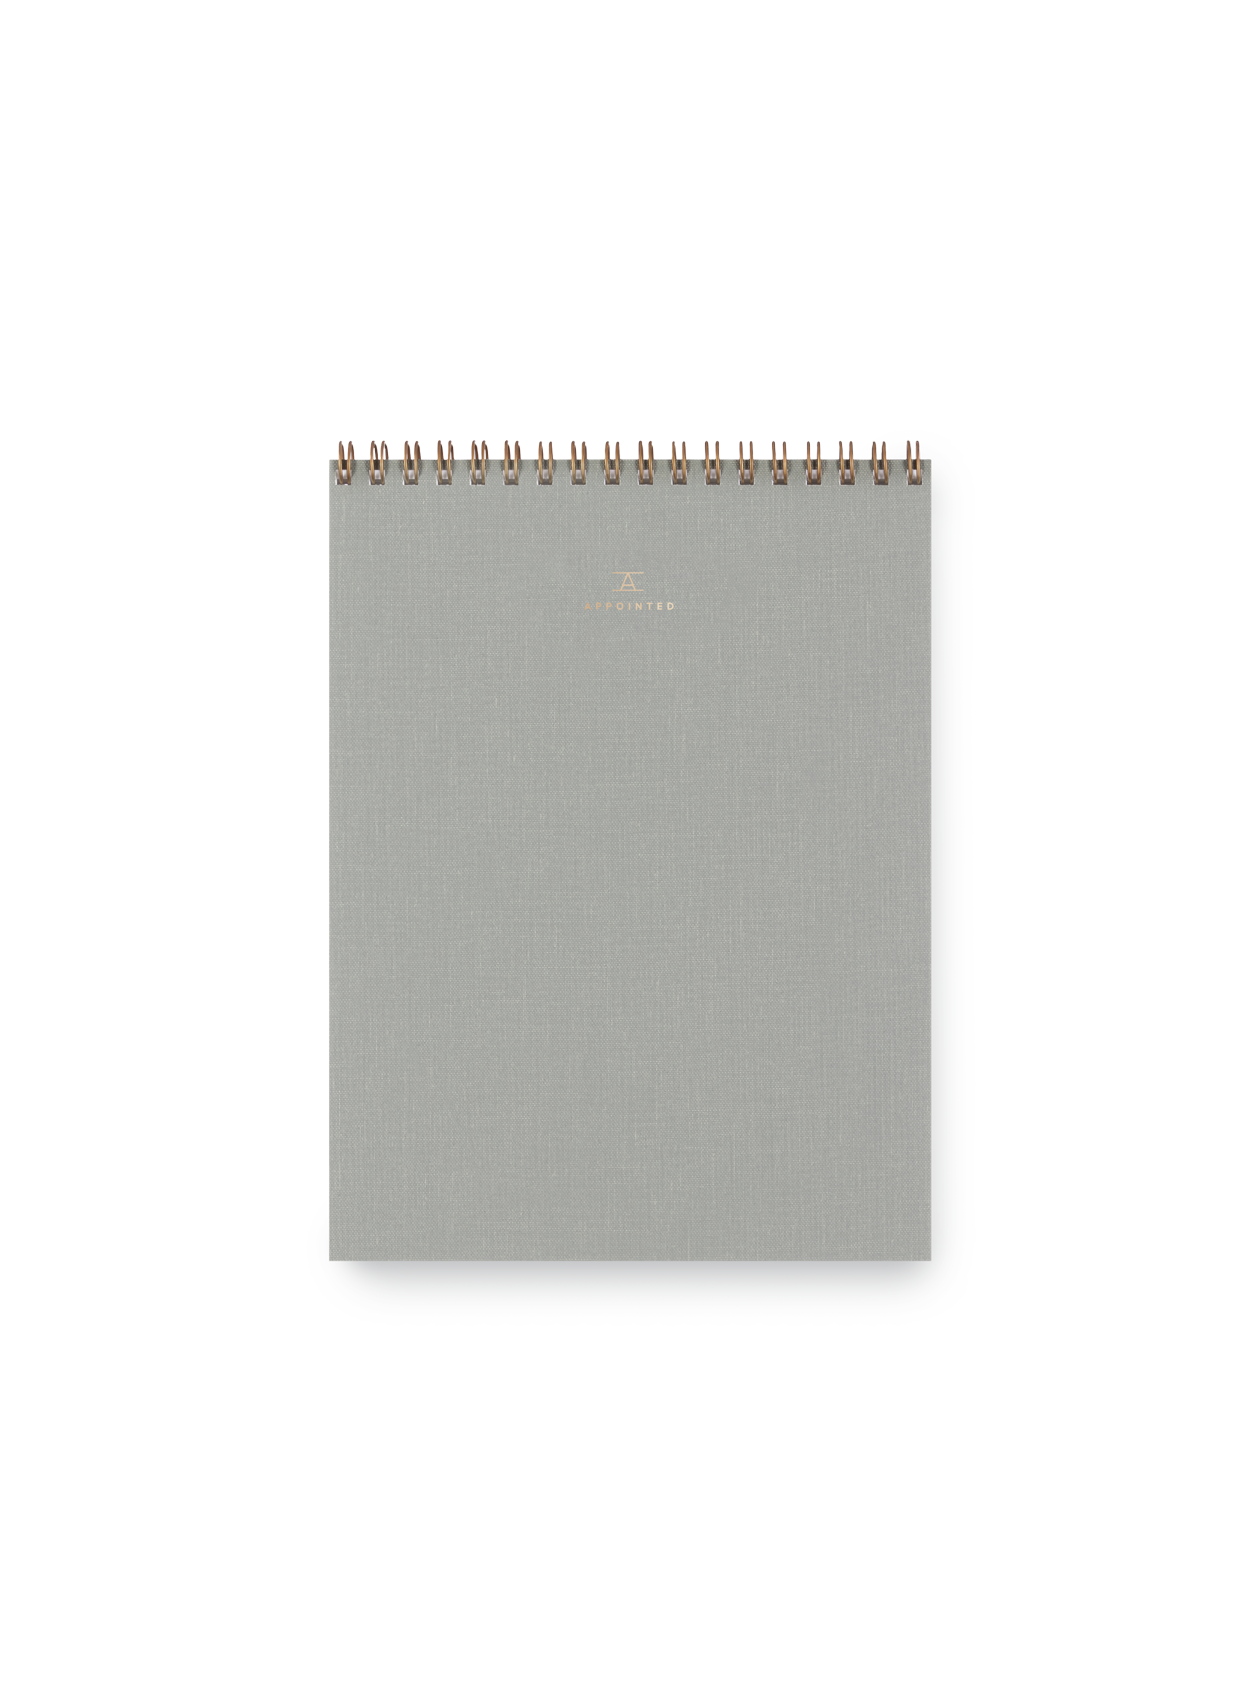 Appointed Office Notepad with gold foil details, bookcloth cover, and brass wire-o binding || Dove Gray